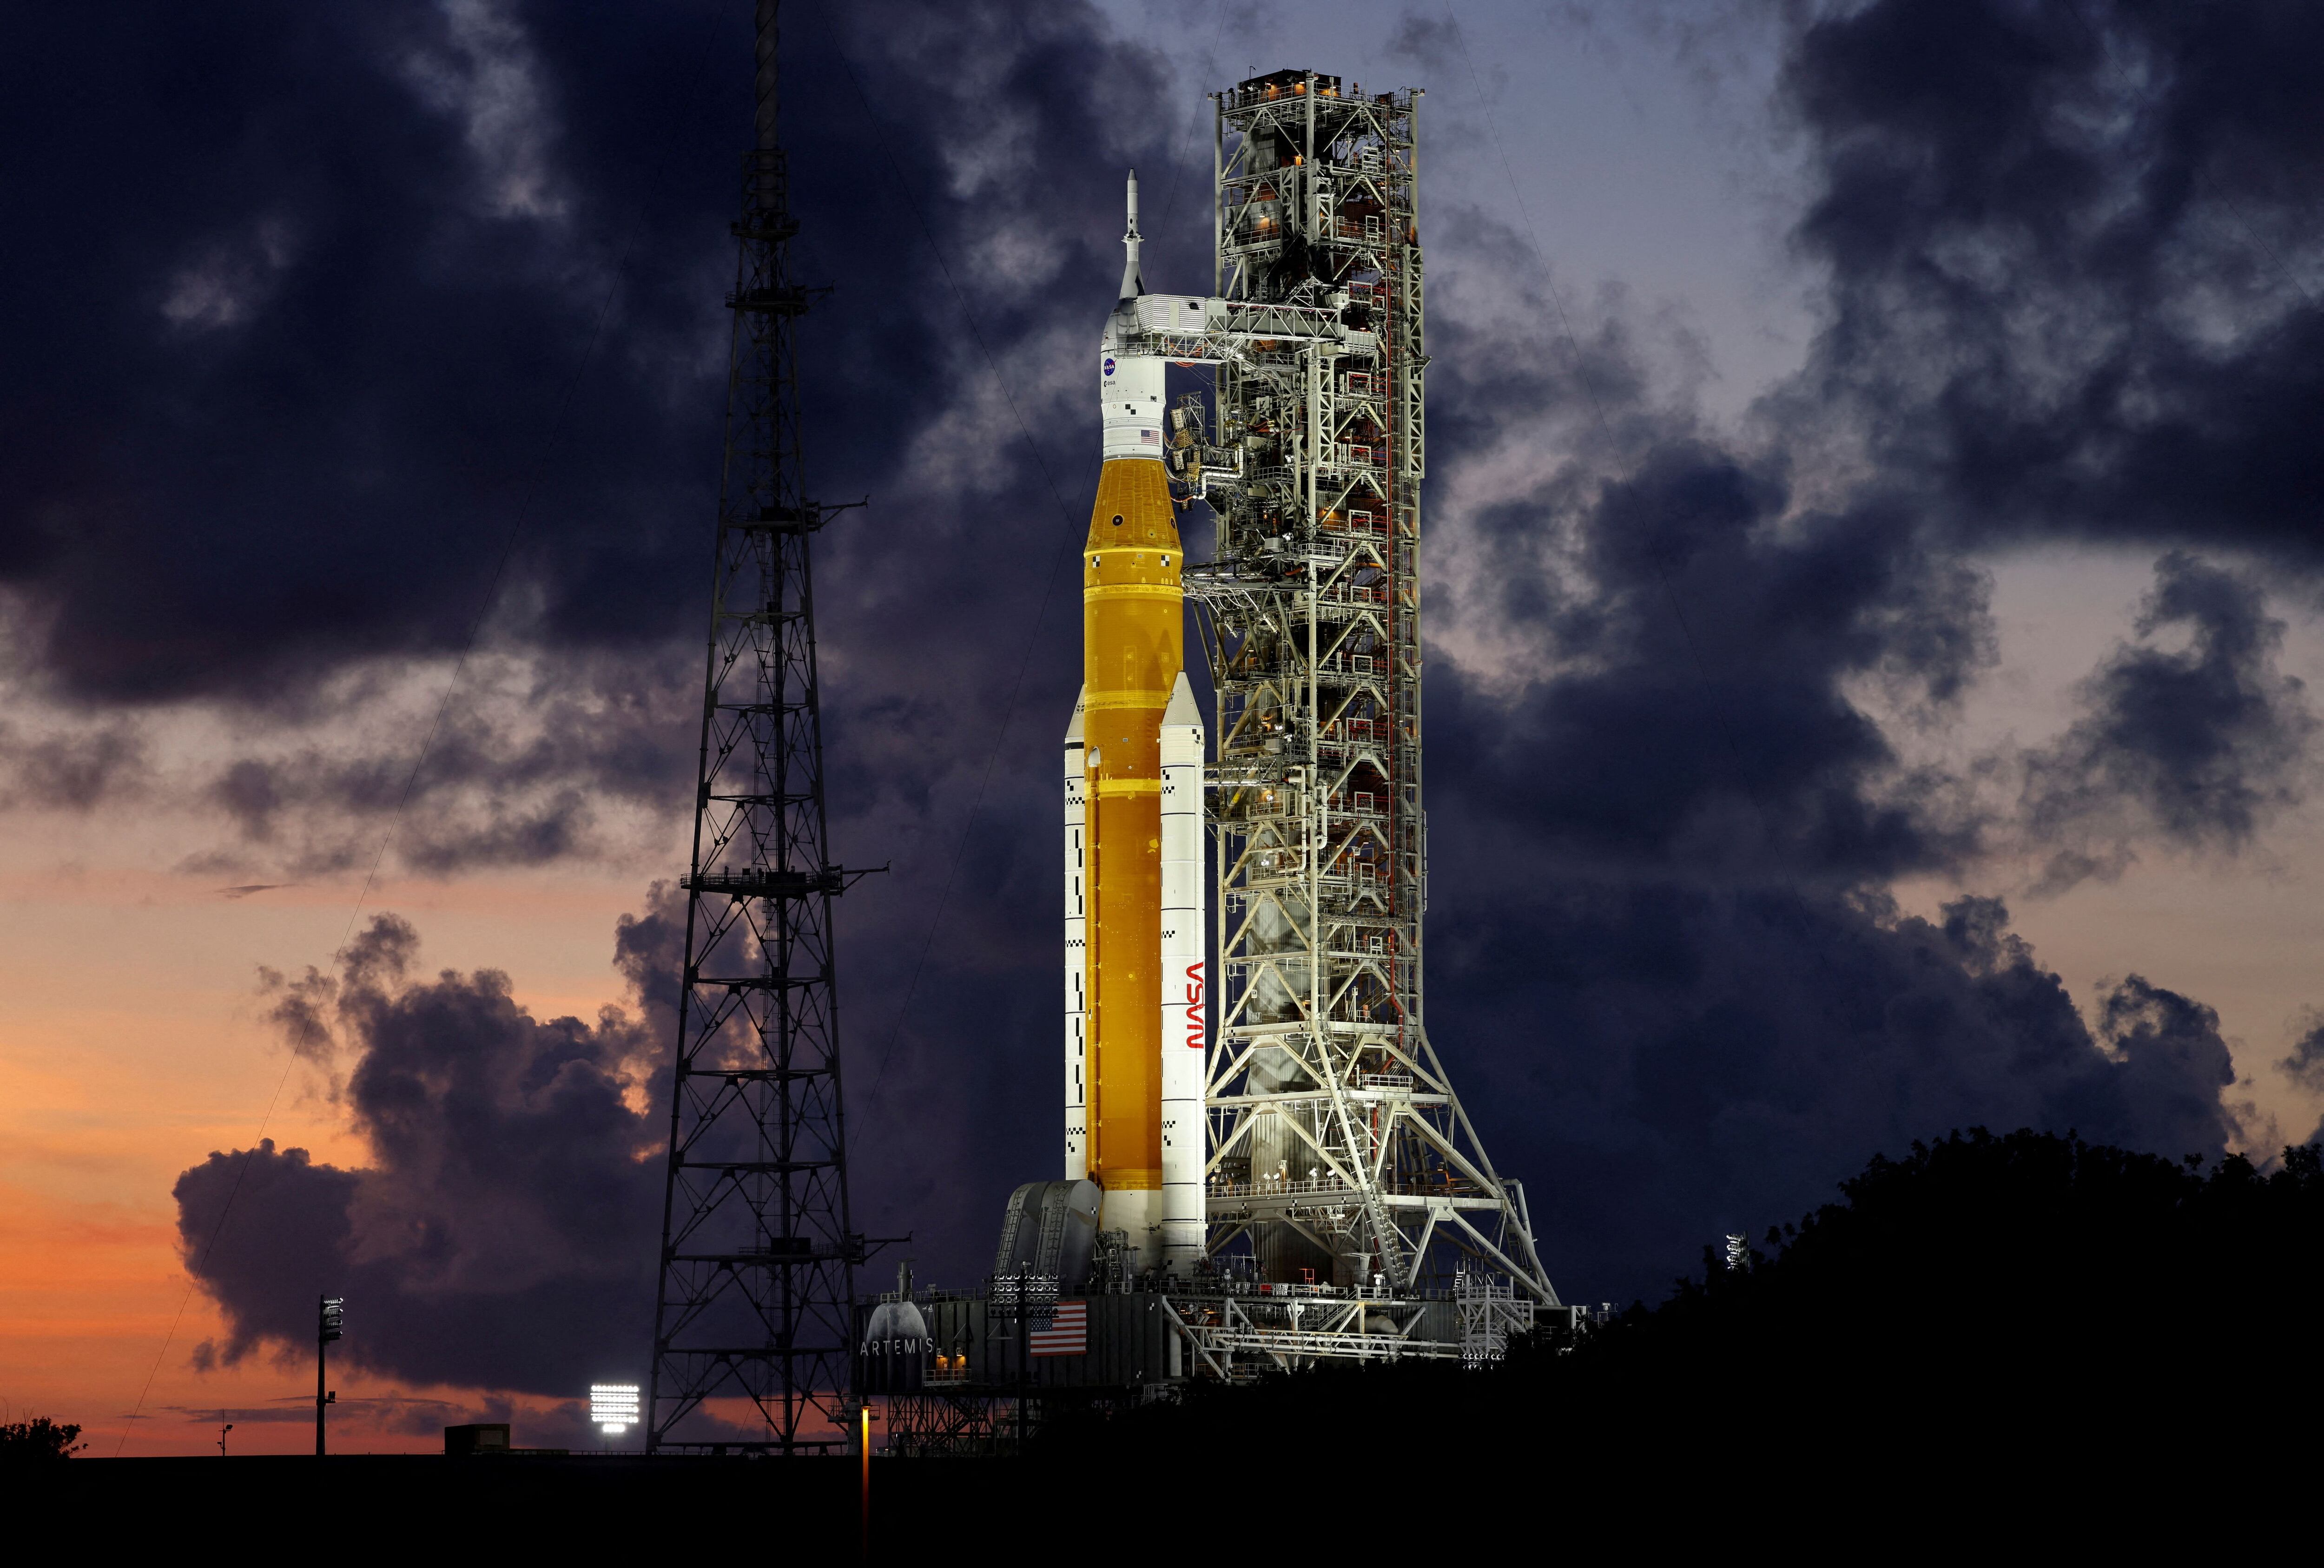 FILE PHOTO: NASA’s next-generation moon rocket, the Space Launch System (SLS) Artemis 1, is shown at the Kennedy Space Center in Cape Canaveral, Florida, U.S. June 27, 2022. REUTERS/Joe Skipper/File Photo